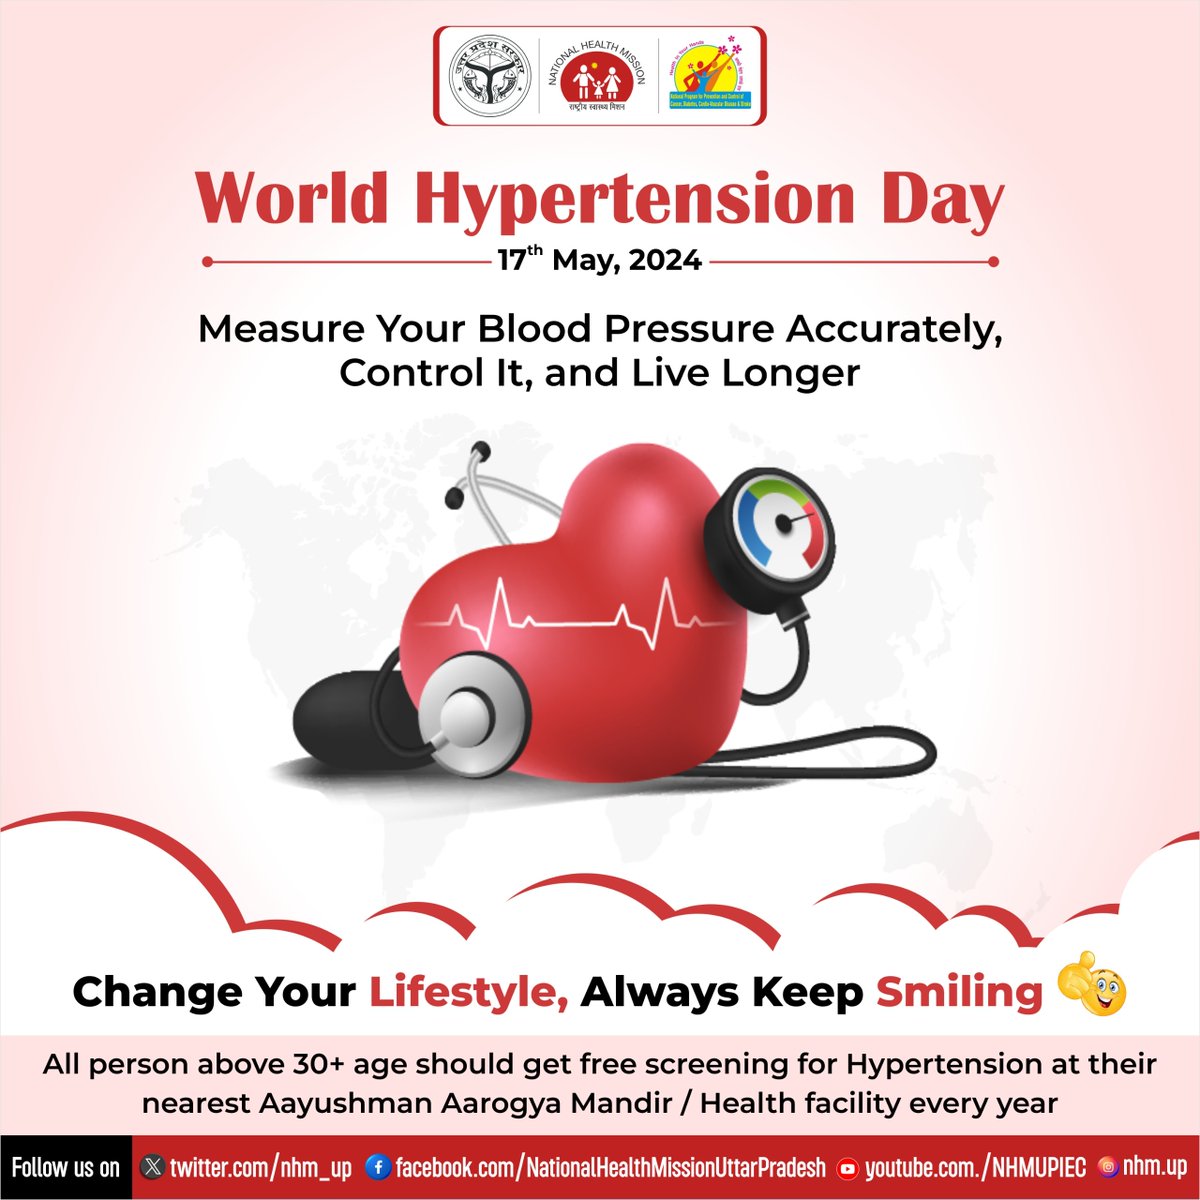 Having #hypertension can increase risk for #heartdisease and #stroke. 

Staying away from intoxicants and following a healthy lifestyle can keep us #Healthy, Happy & fit.

Change Your Lifestyle, Always Keep Smiling😊

#WorldHypertentionDay
#BeatNCDs
#Healthylifestyle